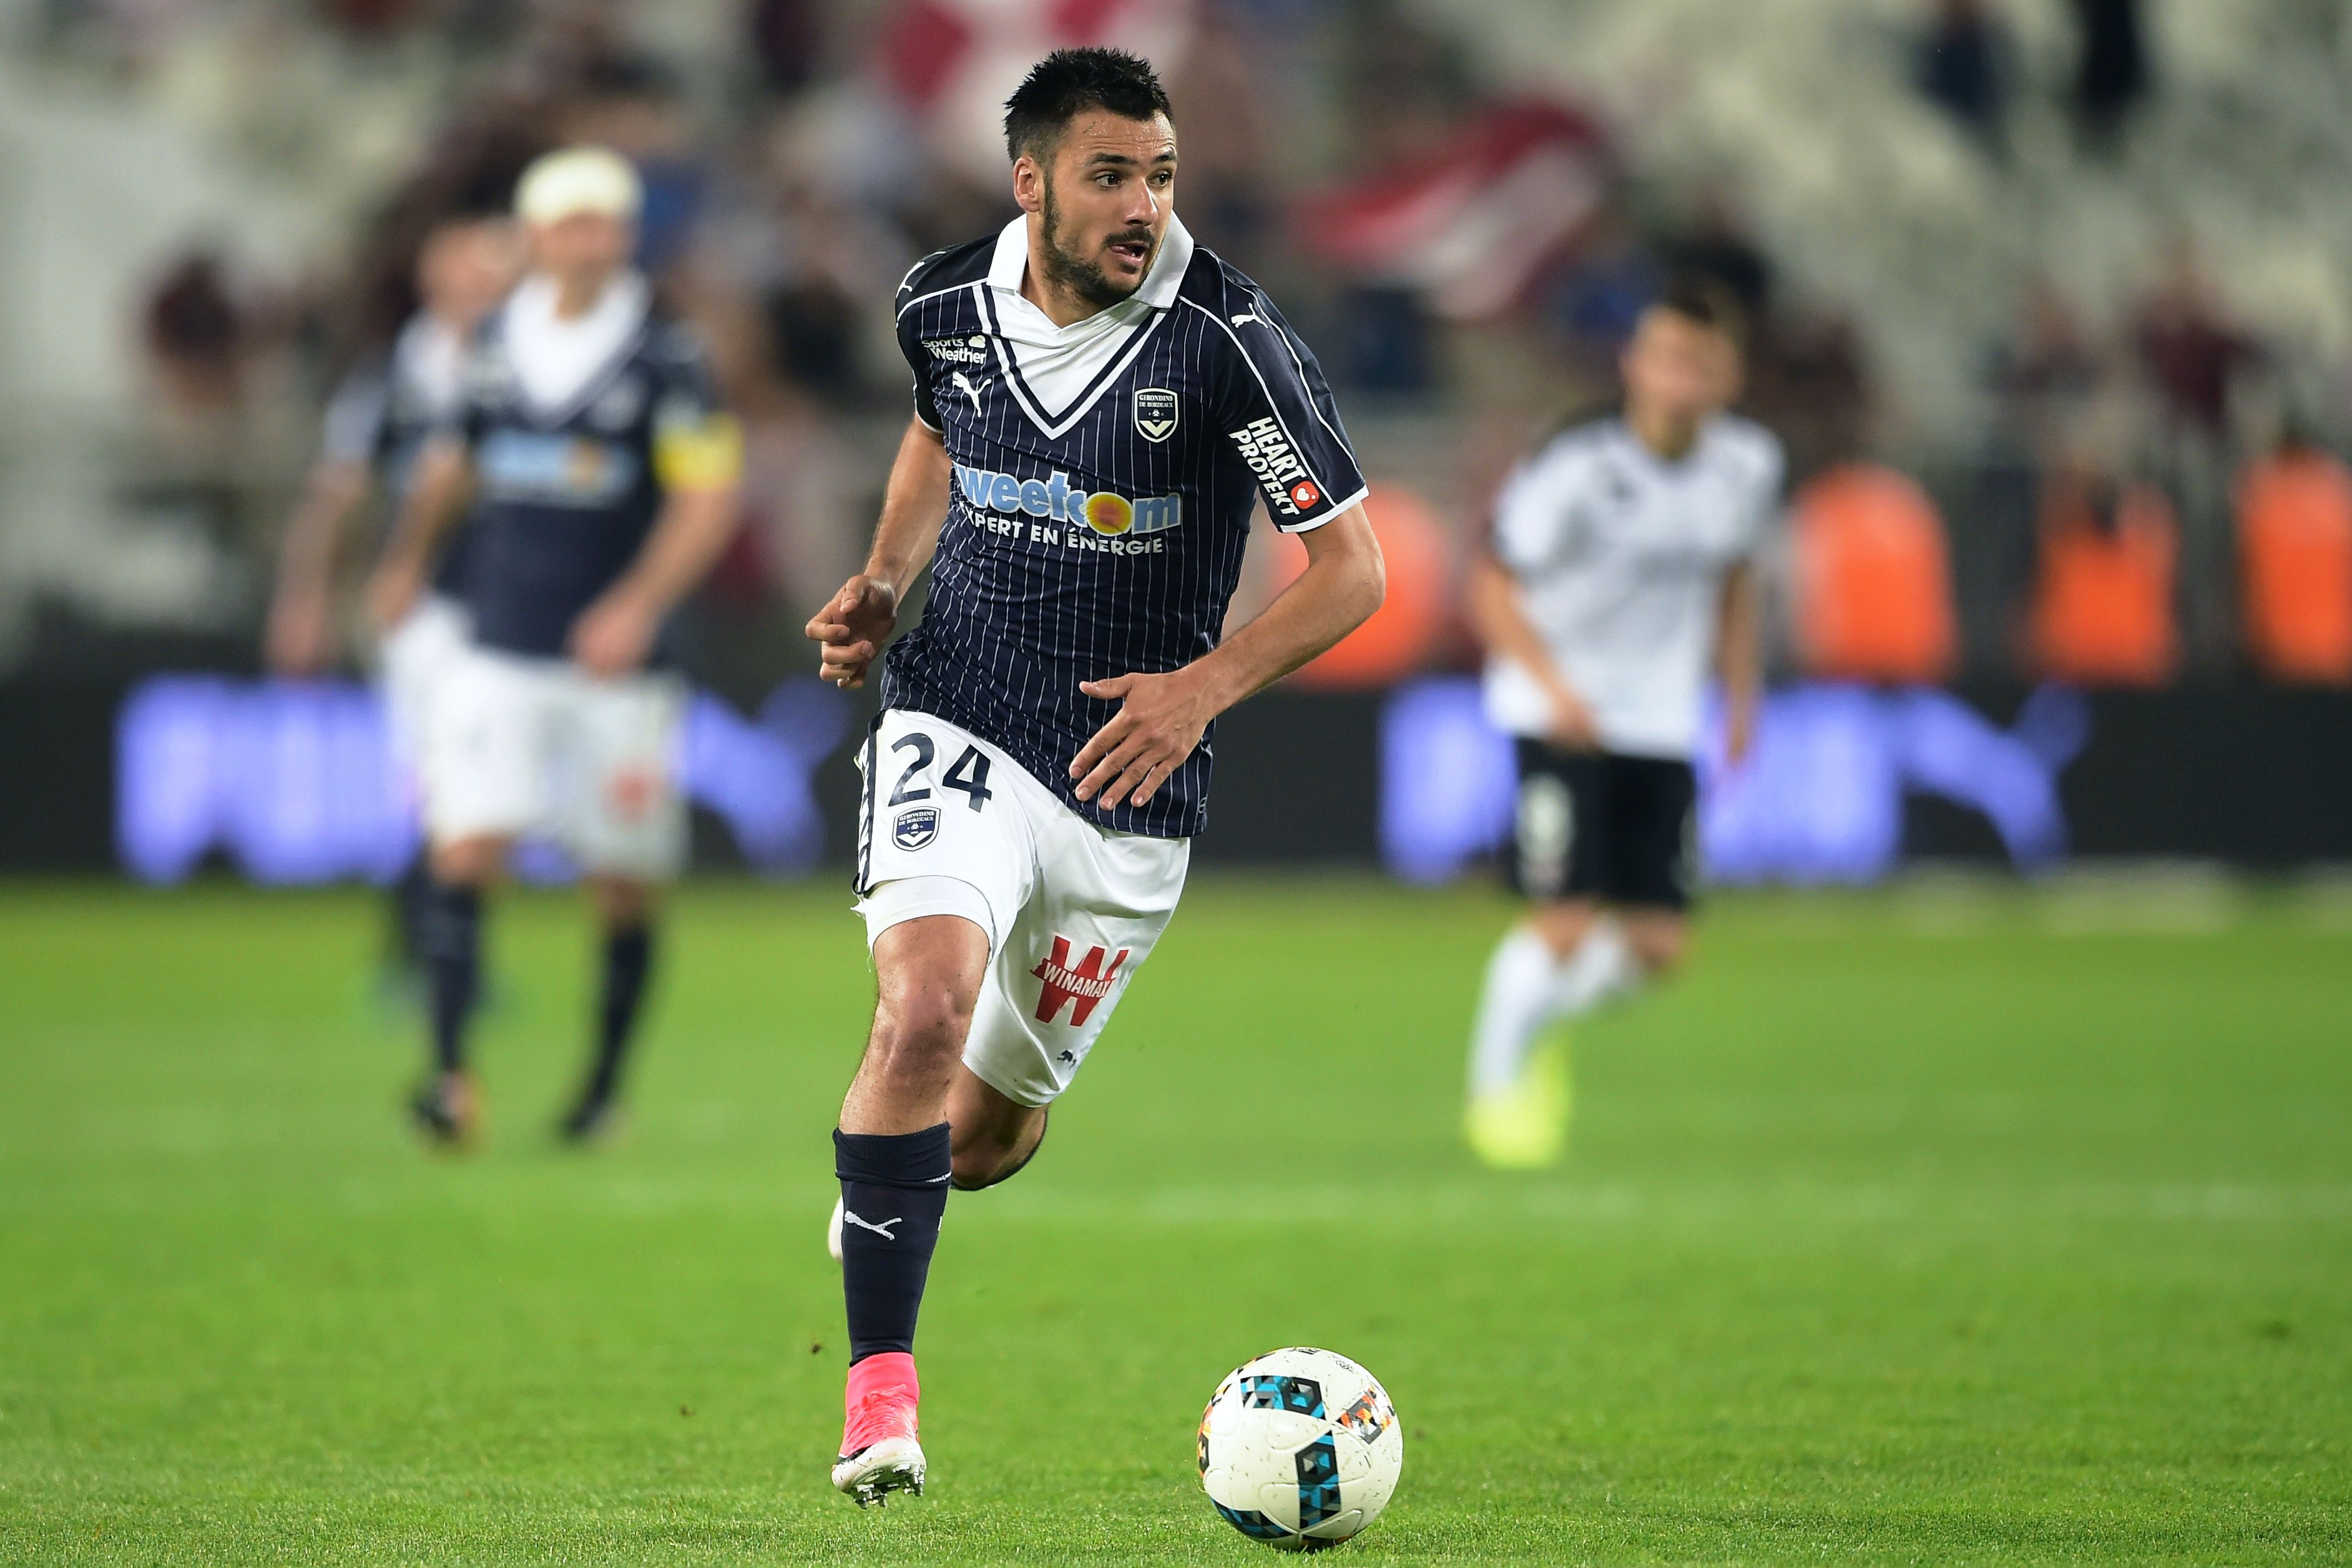 Bordeaux's French forward Gaetan Laborde runs with the ball  during the French L1 football match between Bordeaux (FCGB) and Metz (FCM) on April 8, 2017, at the Matmut Atlantique Stadium in Bordeaux, southwestern France. / AFP PHOTO / NICOLAS TUCAT        (Photo credit should read NICOLAS TUCAT/AFP/Getty Images)